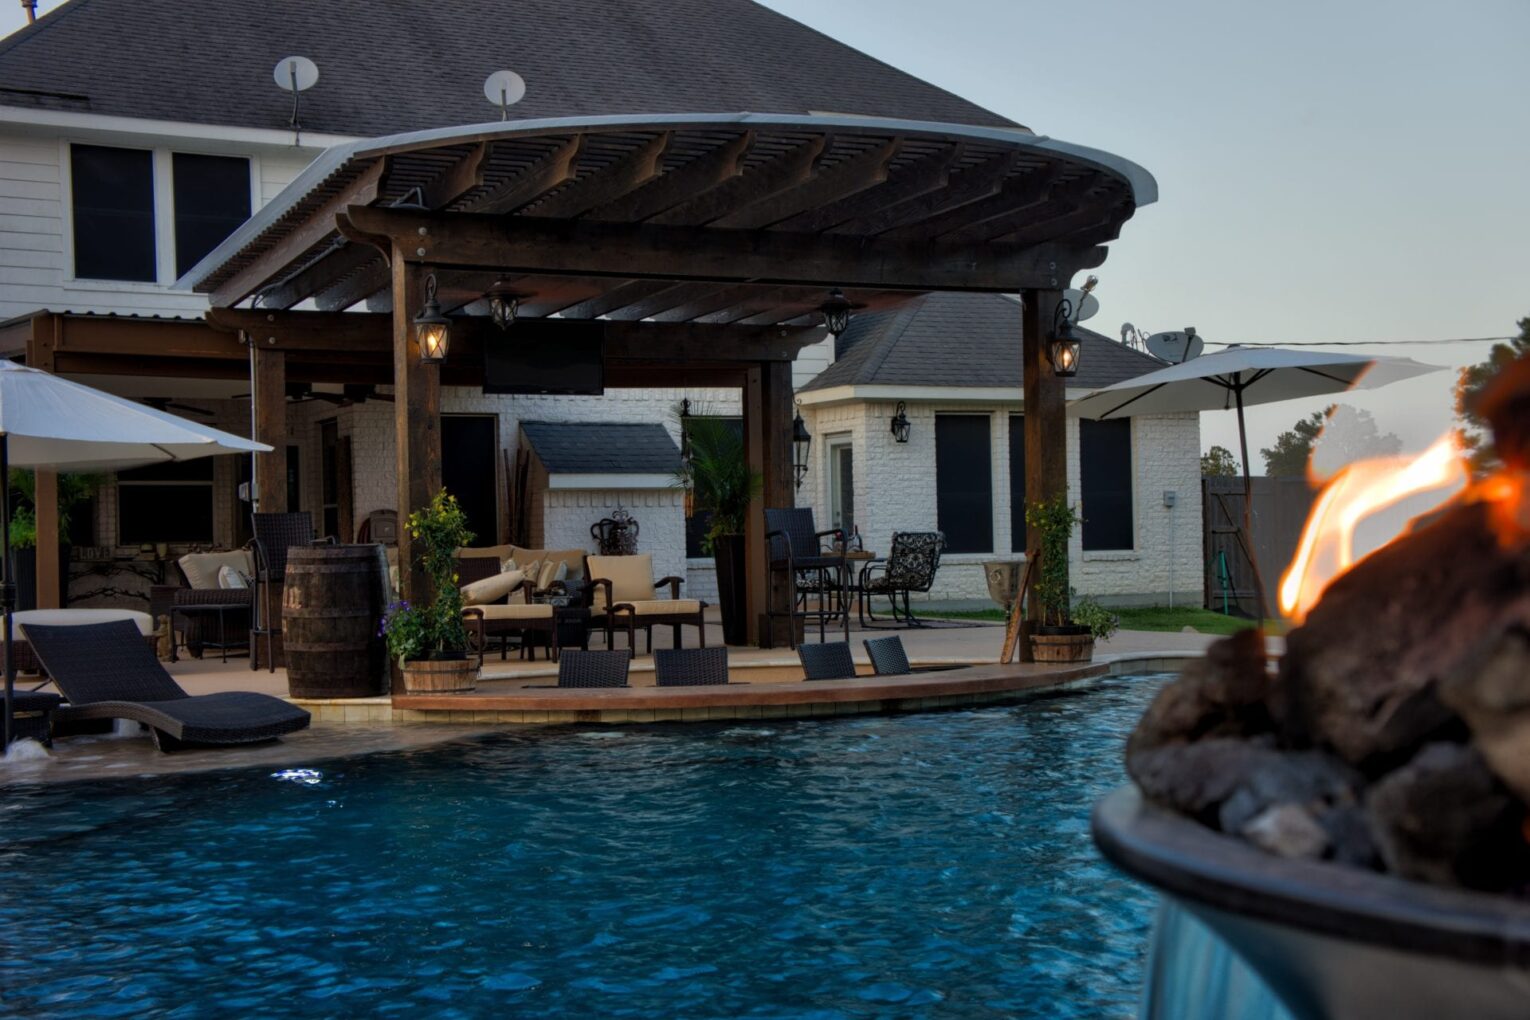 A pool with an outdoor dining area and a gazebo.